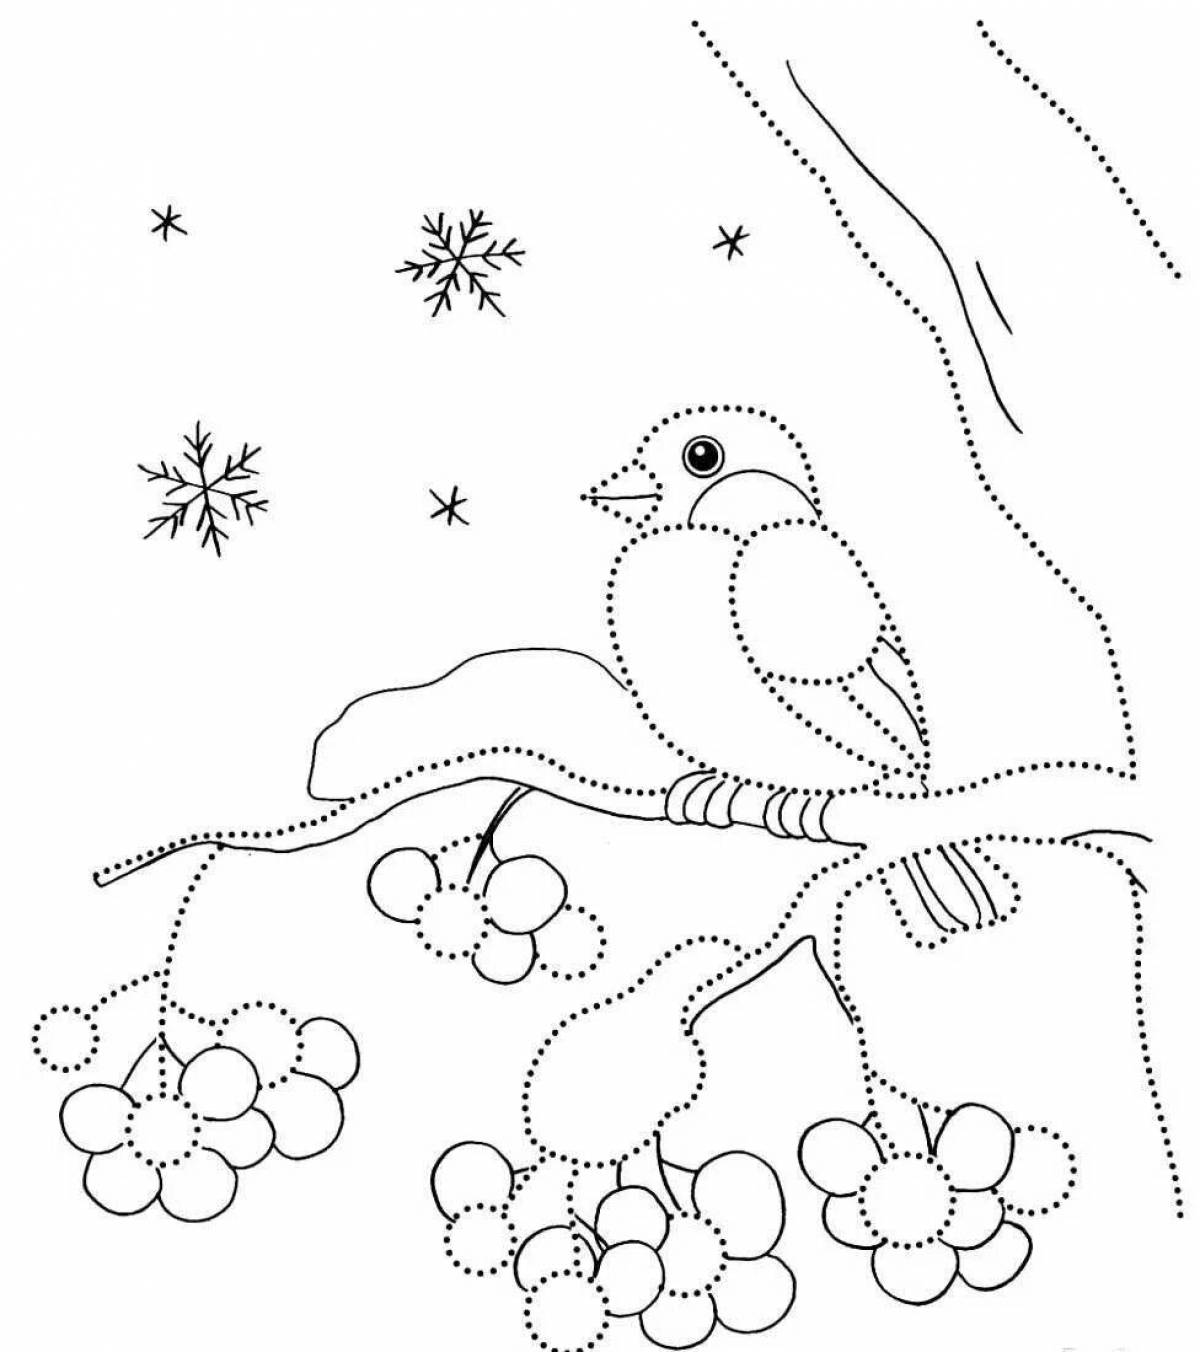 Fabulous winter bird coloring pages for 3-4 year olds